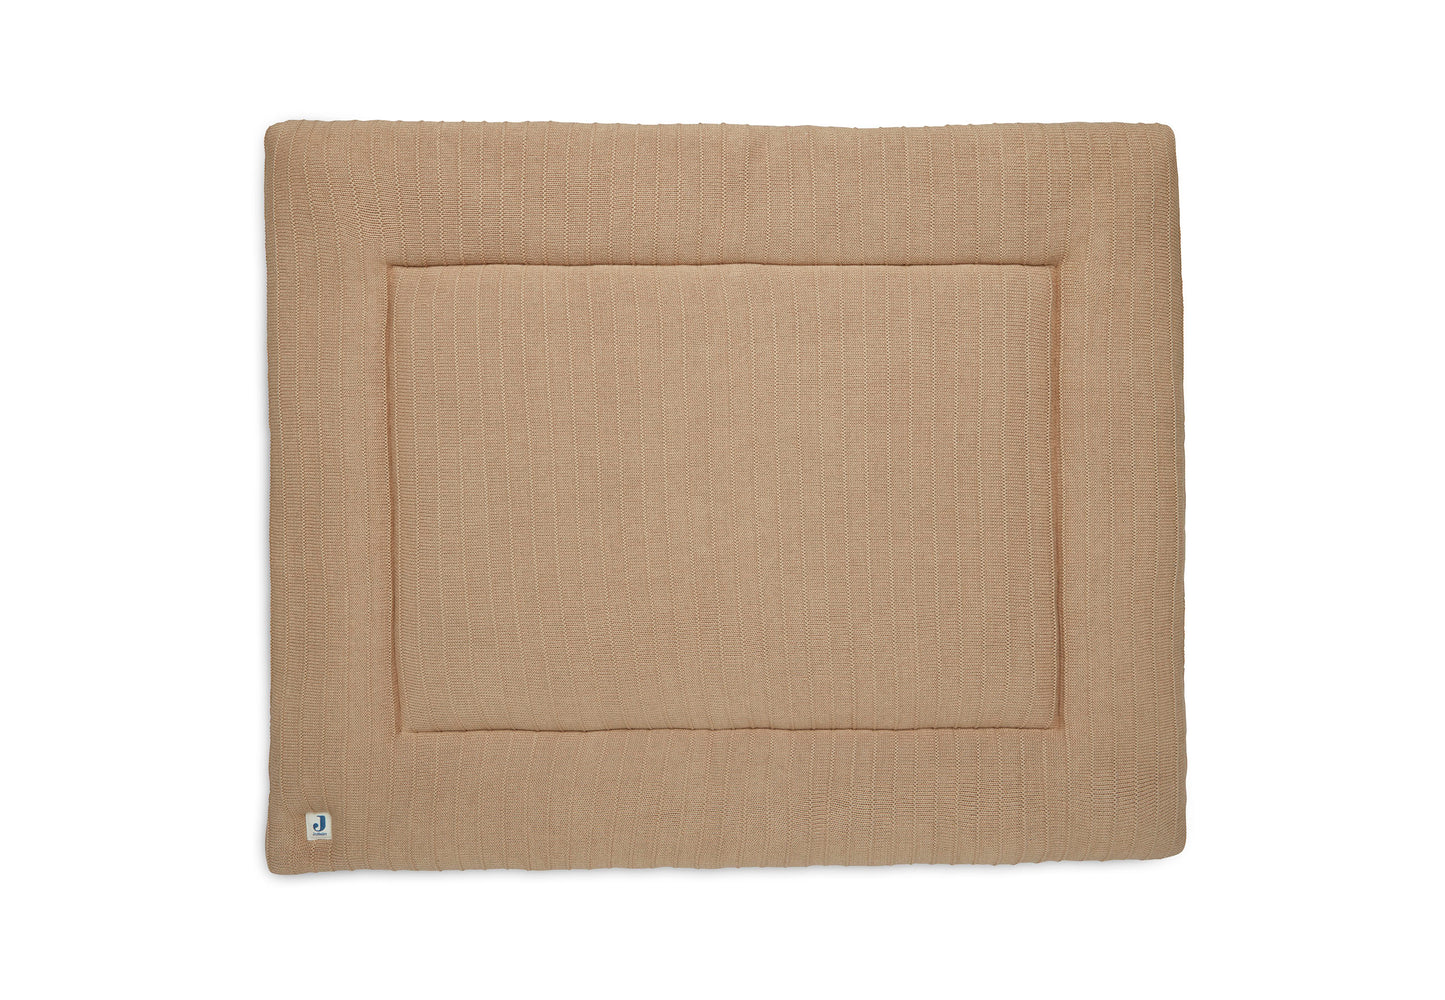 Jollein Boxkleed 75x95cm Pure Knit - Biscuit